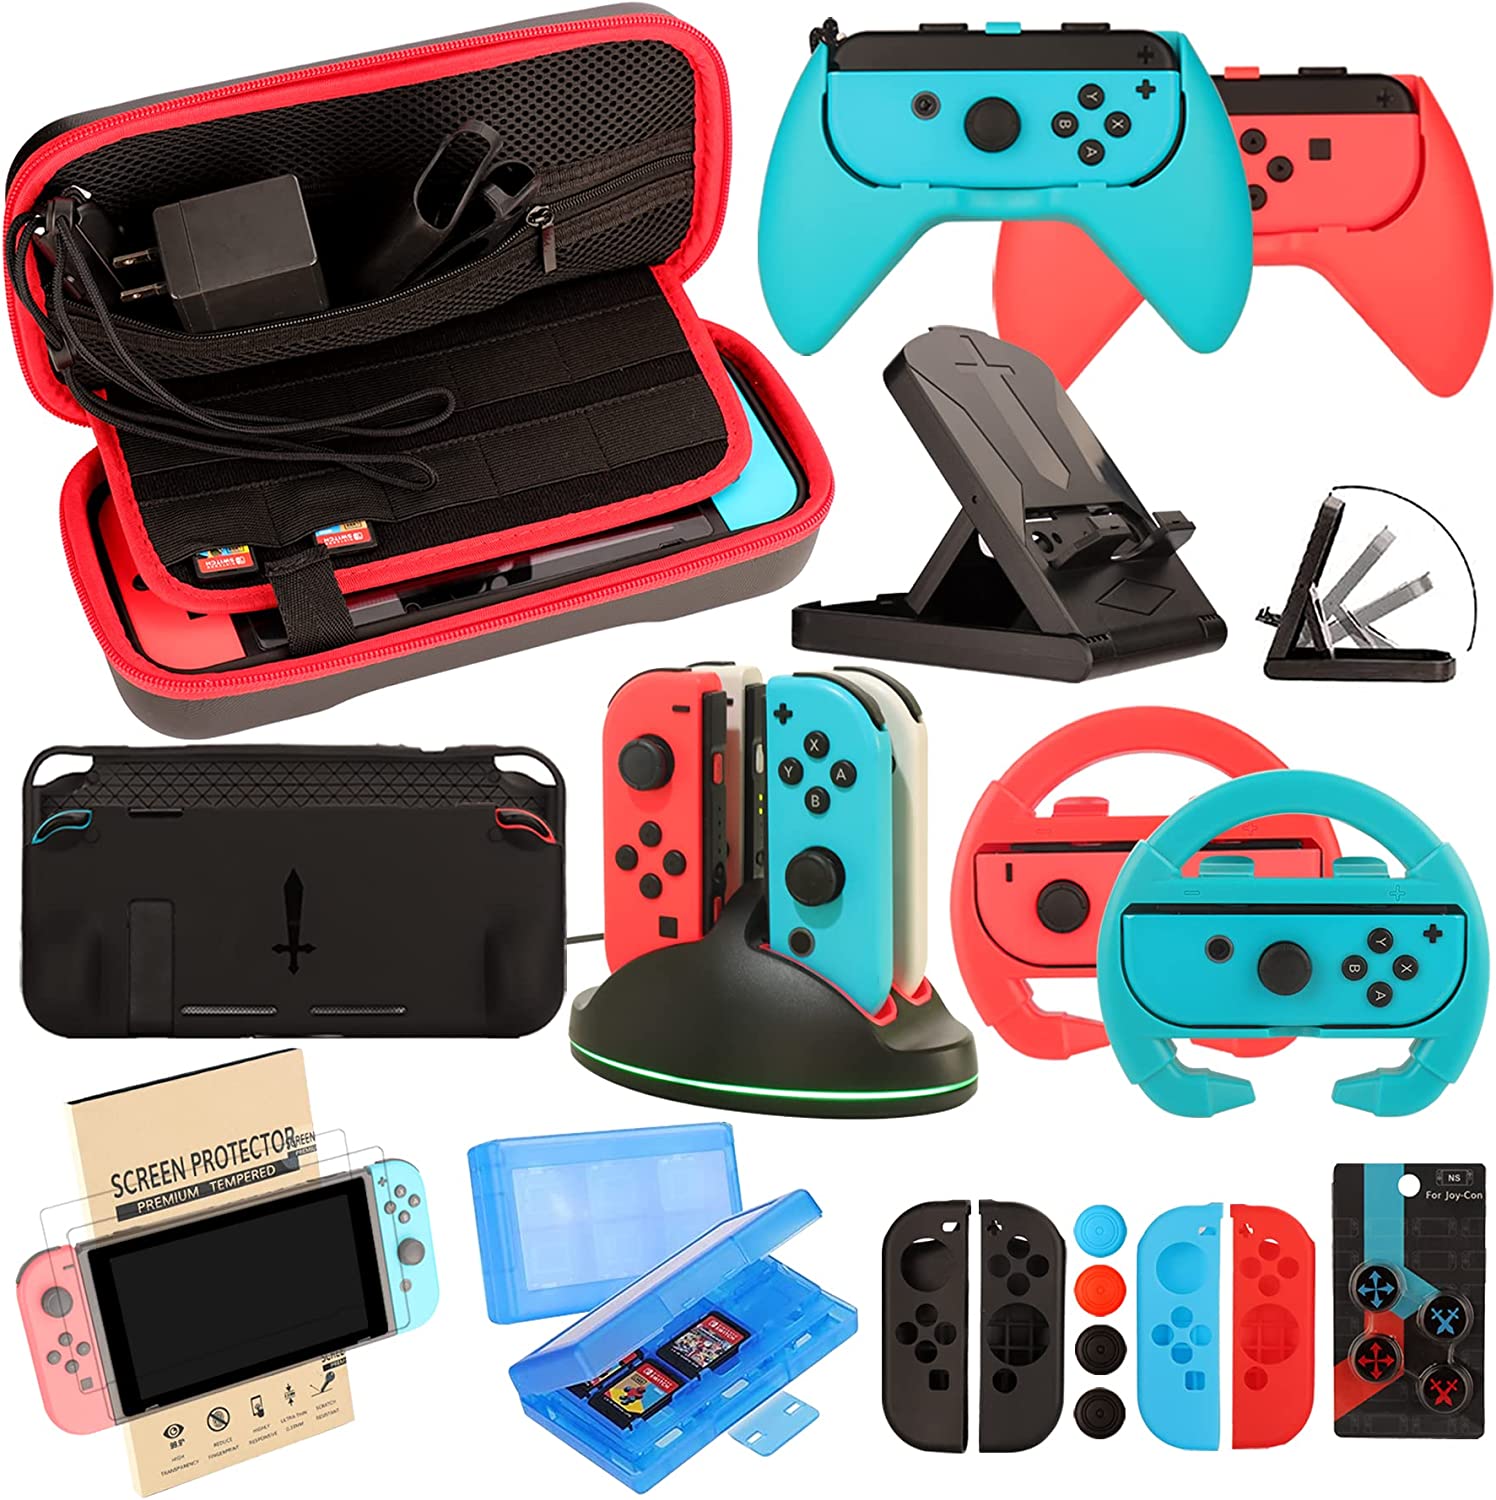 EOVOLA Accessories Kit for Nintendo Switch.